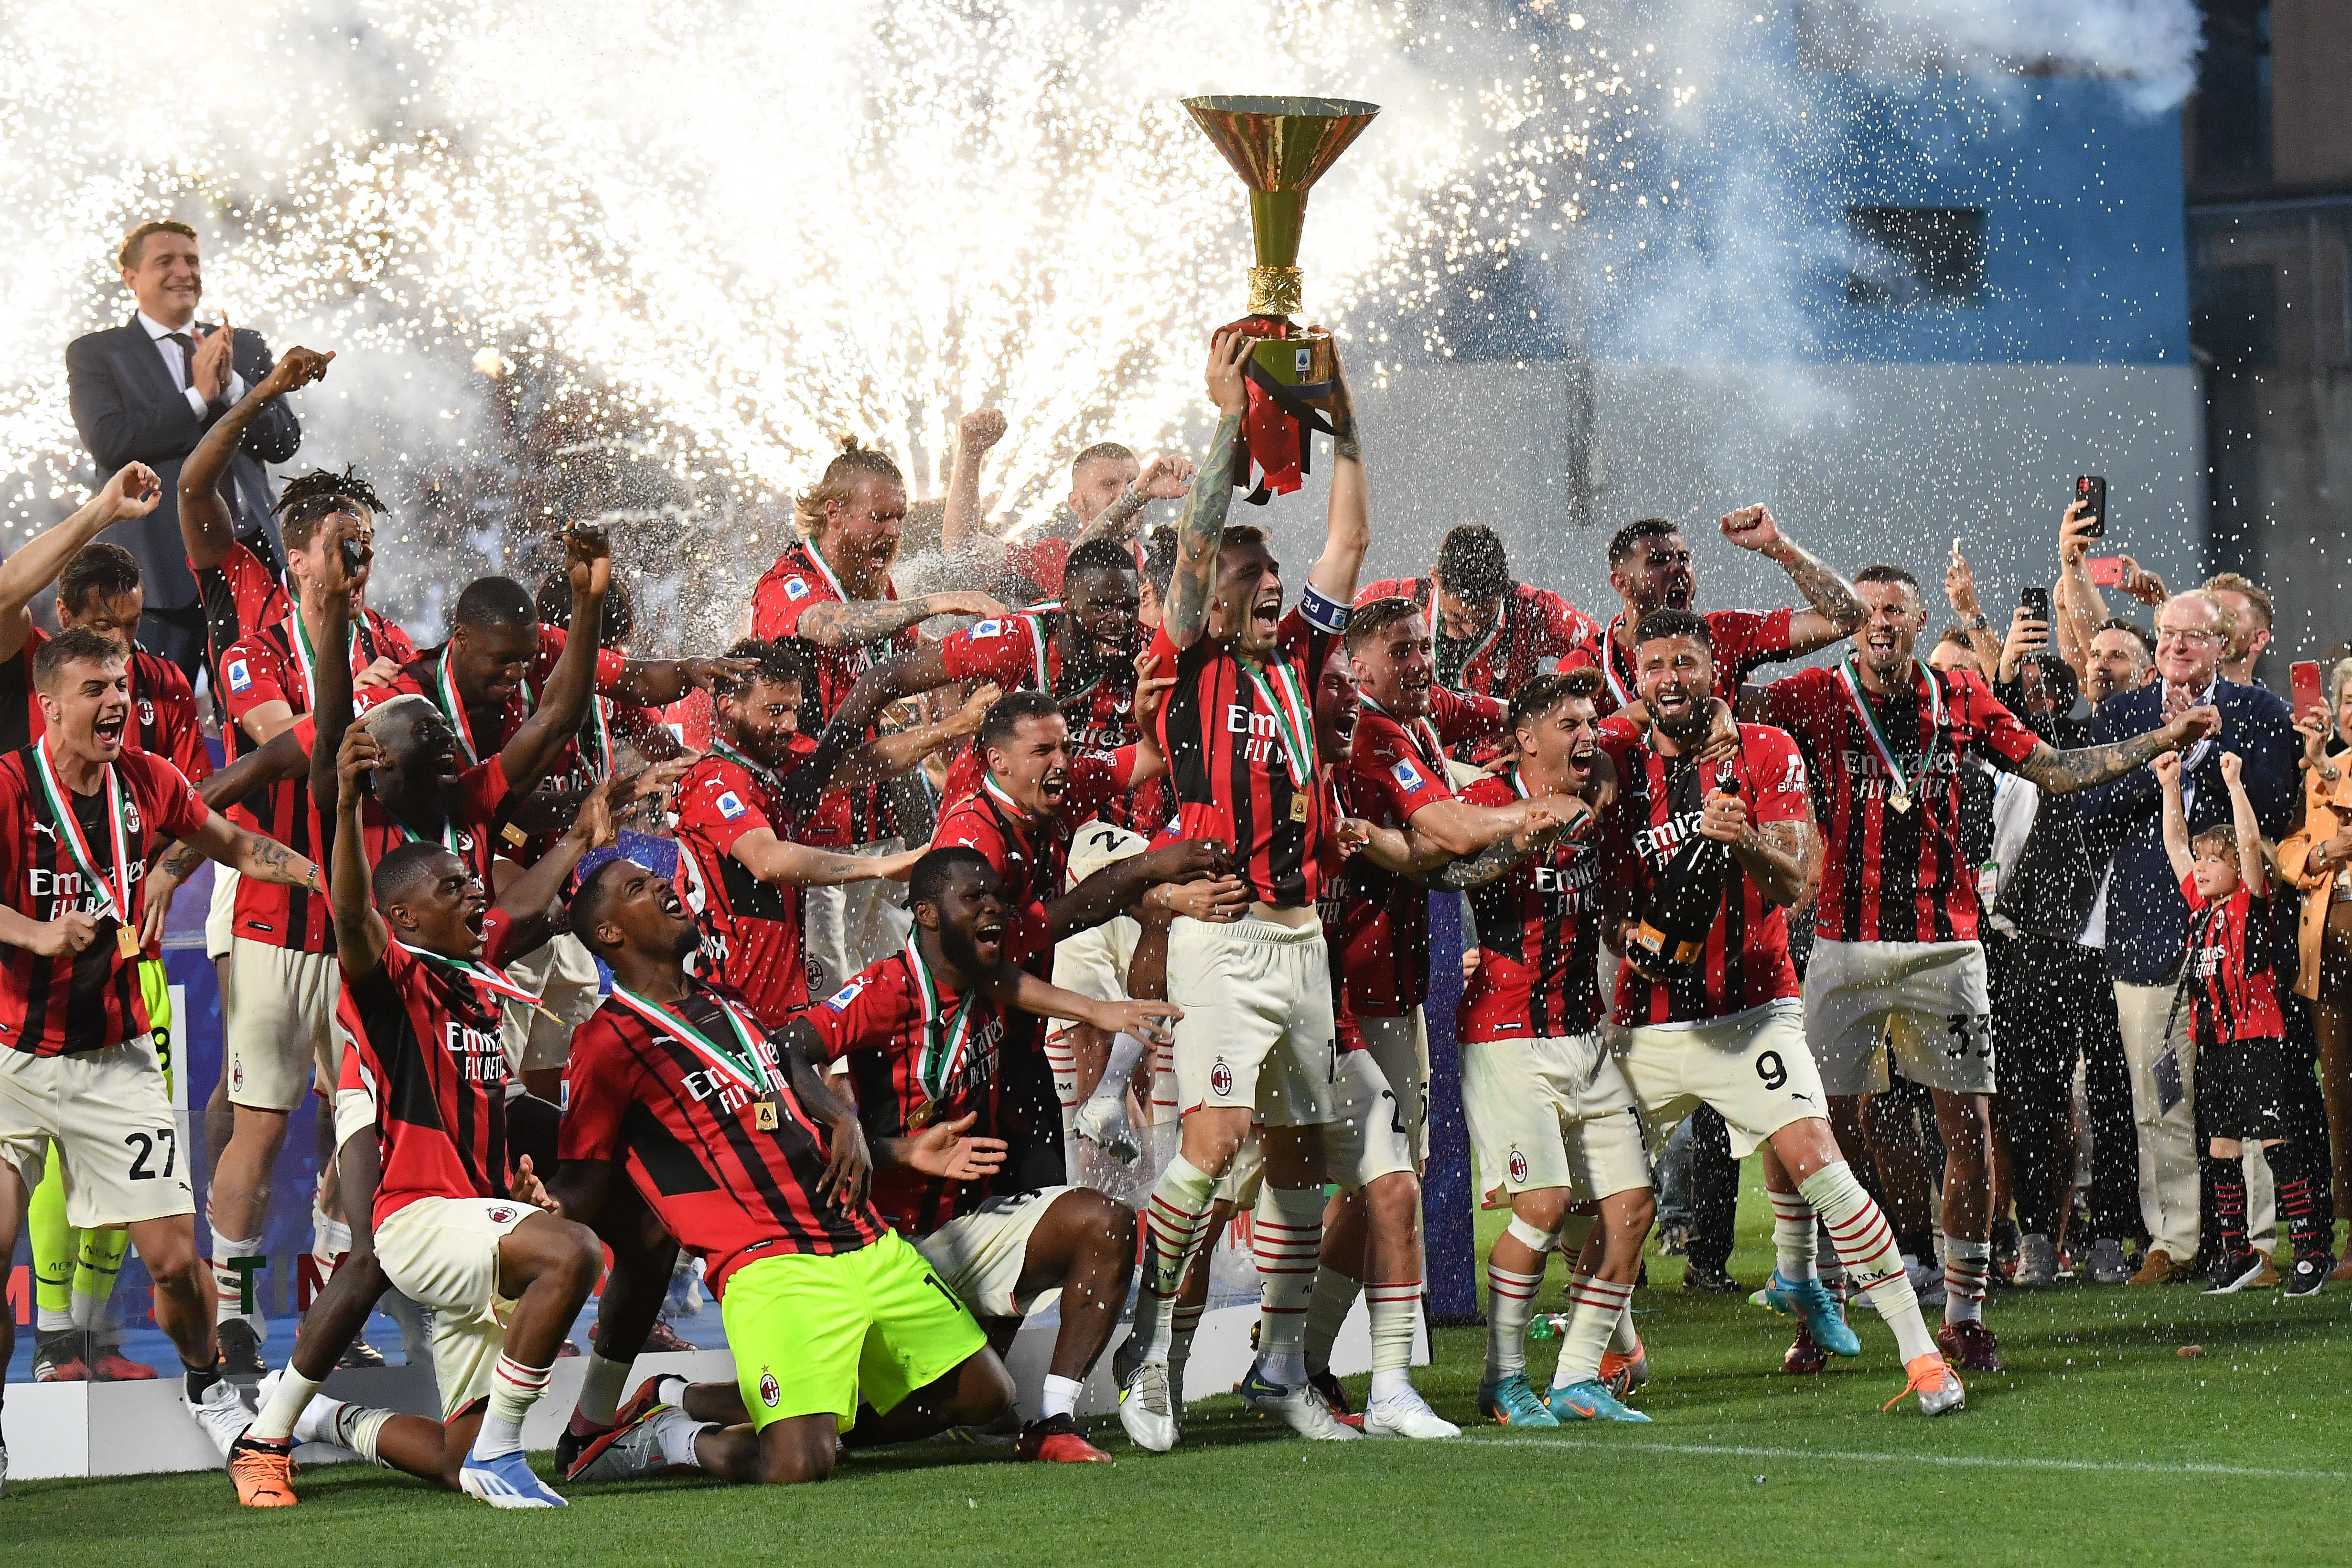 Commentary: AC Milan's Serie A title shows that money and superstars always help a team TODAY